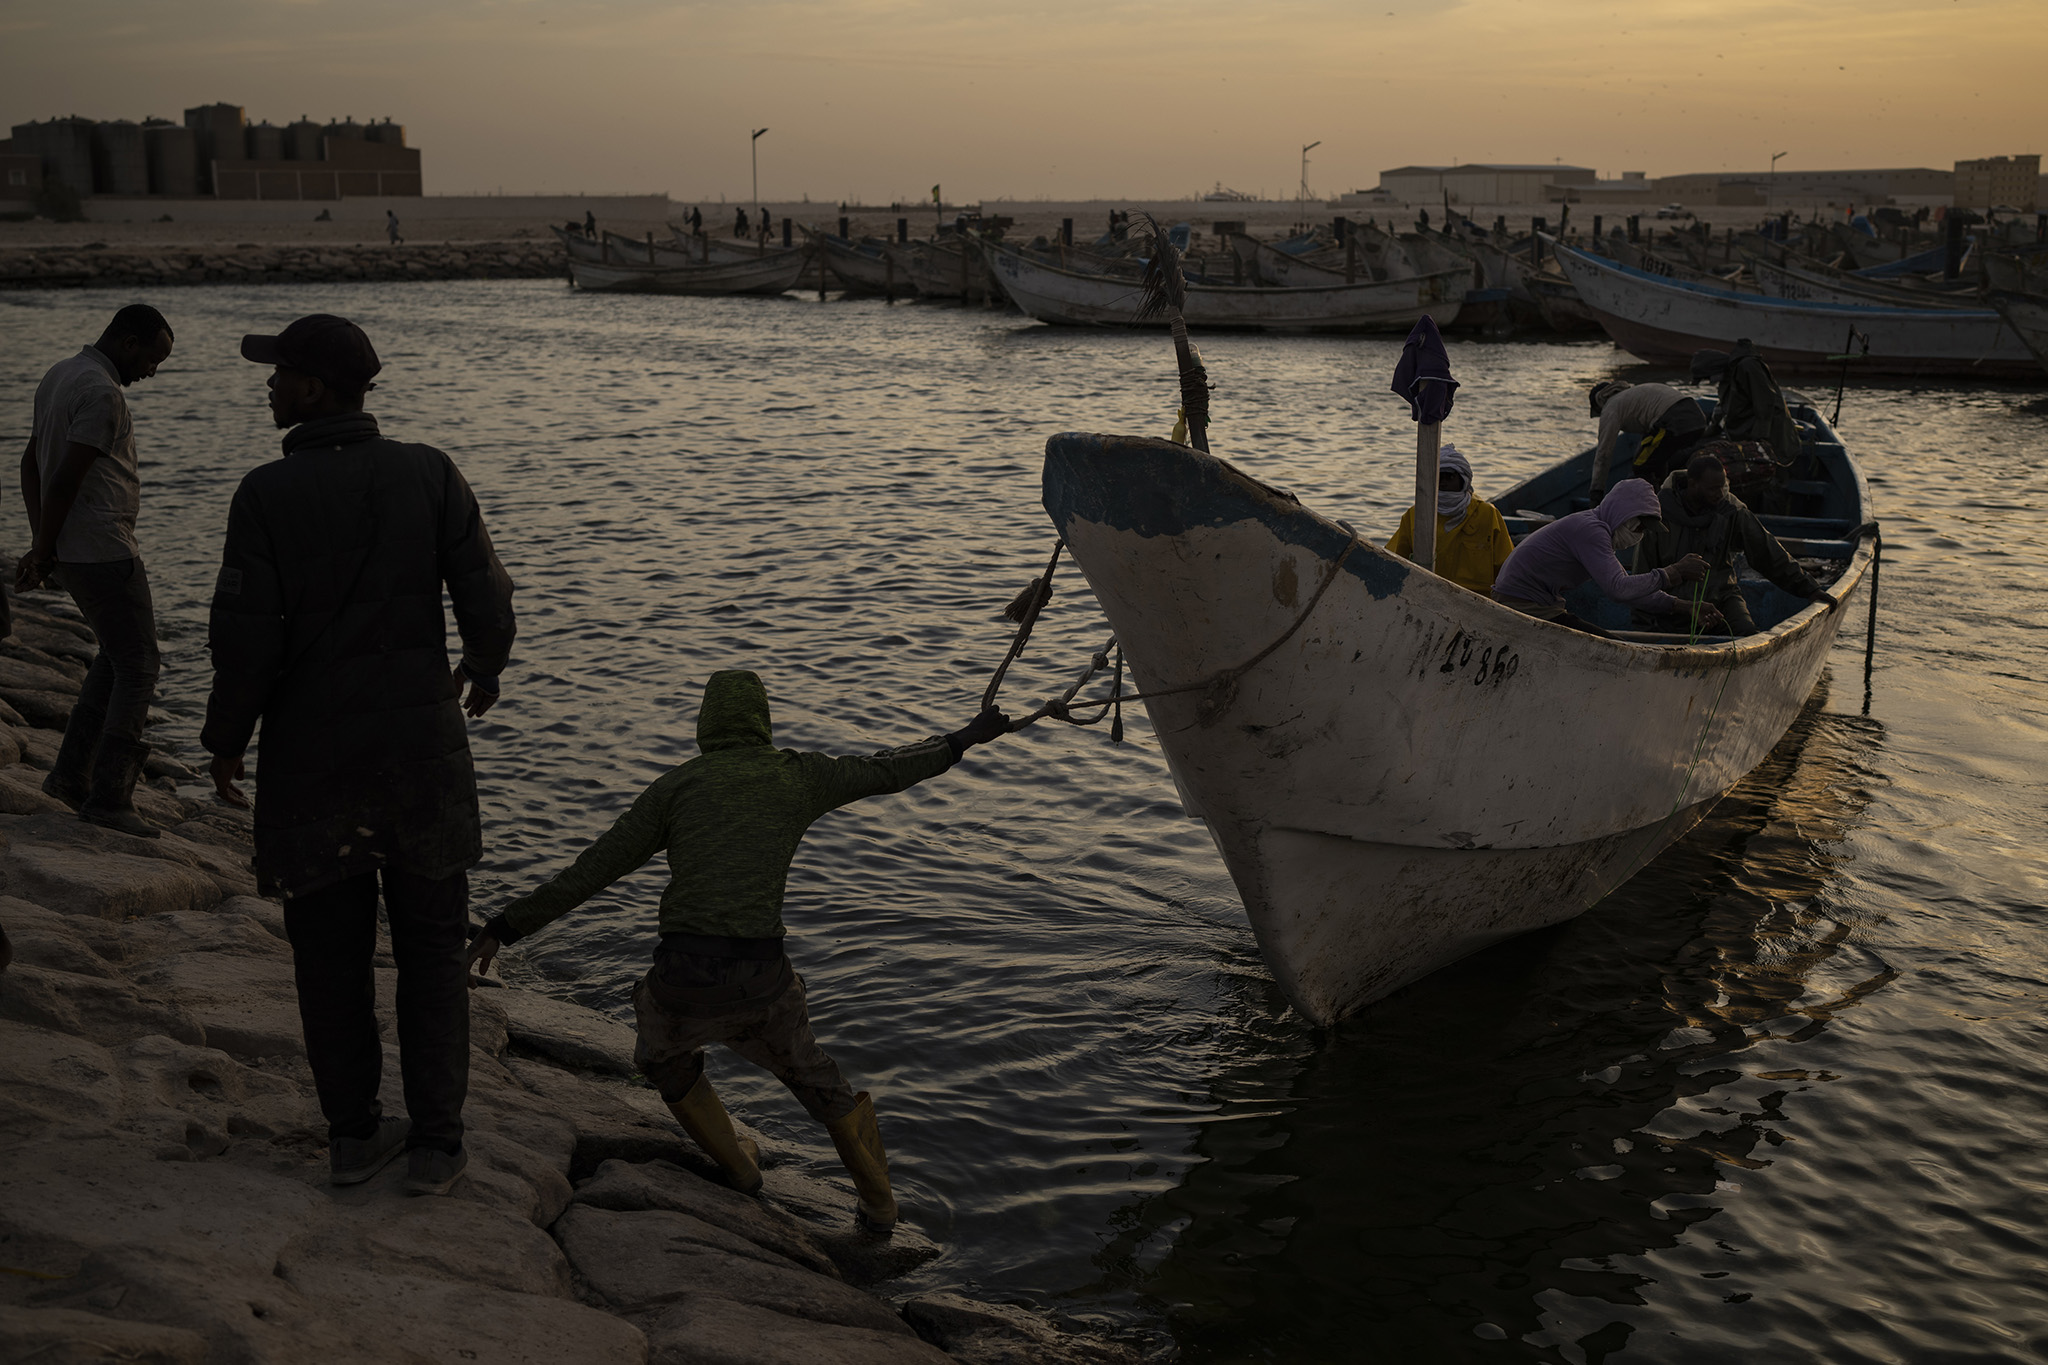 Men prepare to dock a fishing boat at the port in Nouadhibou, Mauritania, on November 27, 2021. Strategic support for the Sahel should spur investment and economic growth. (Photo by Felipe Dana/AP)